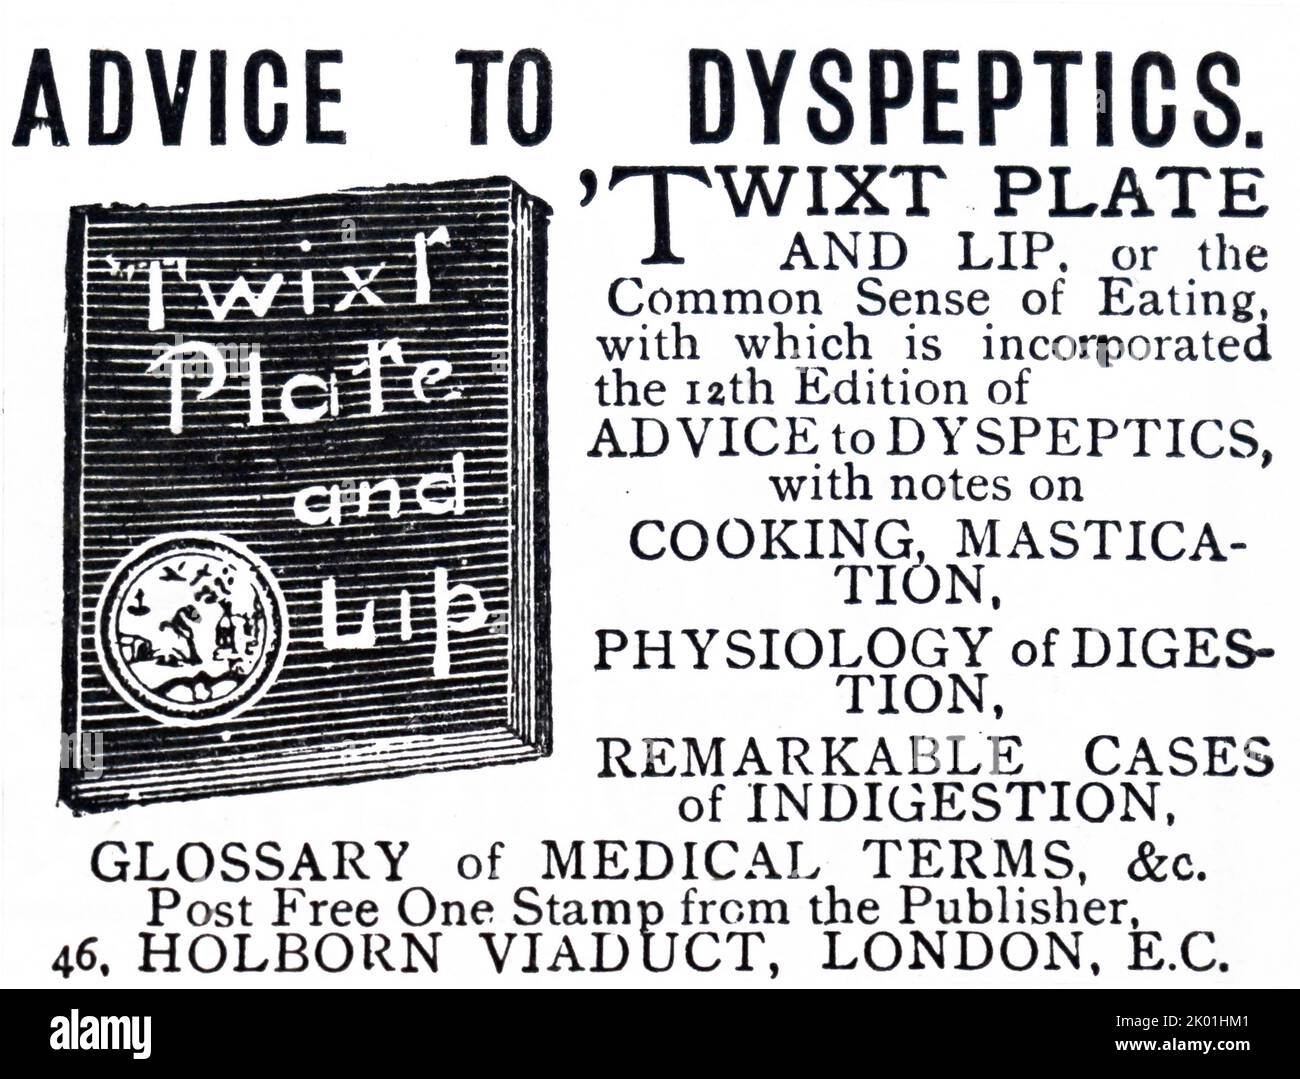 Advertisement for booklet offering advice to dyspeptics. From The Graphic, London, 31 August 1889. Stock Photo